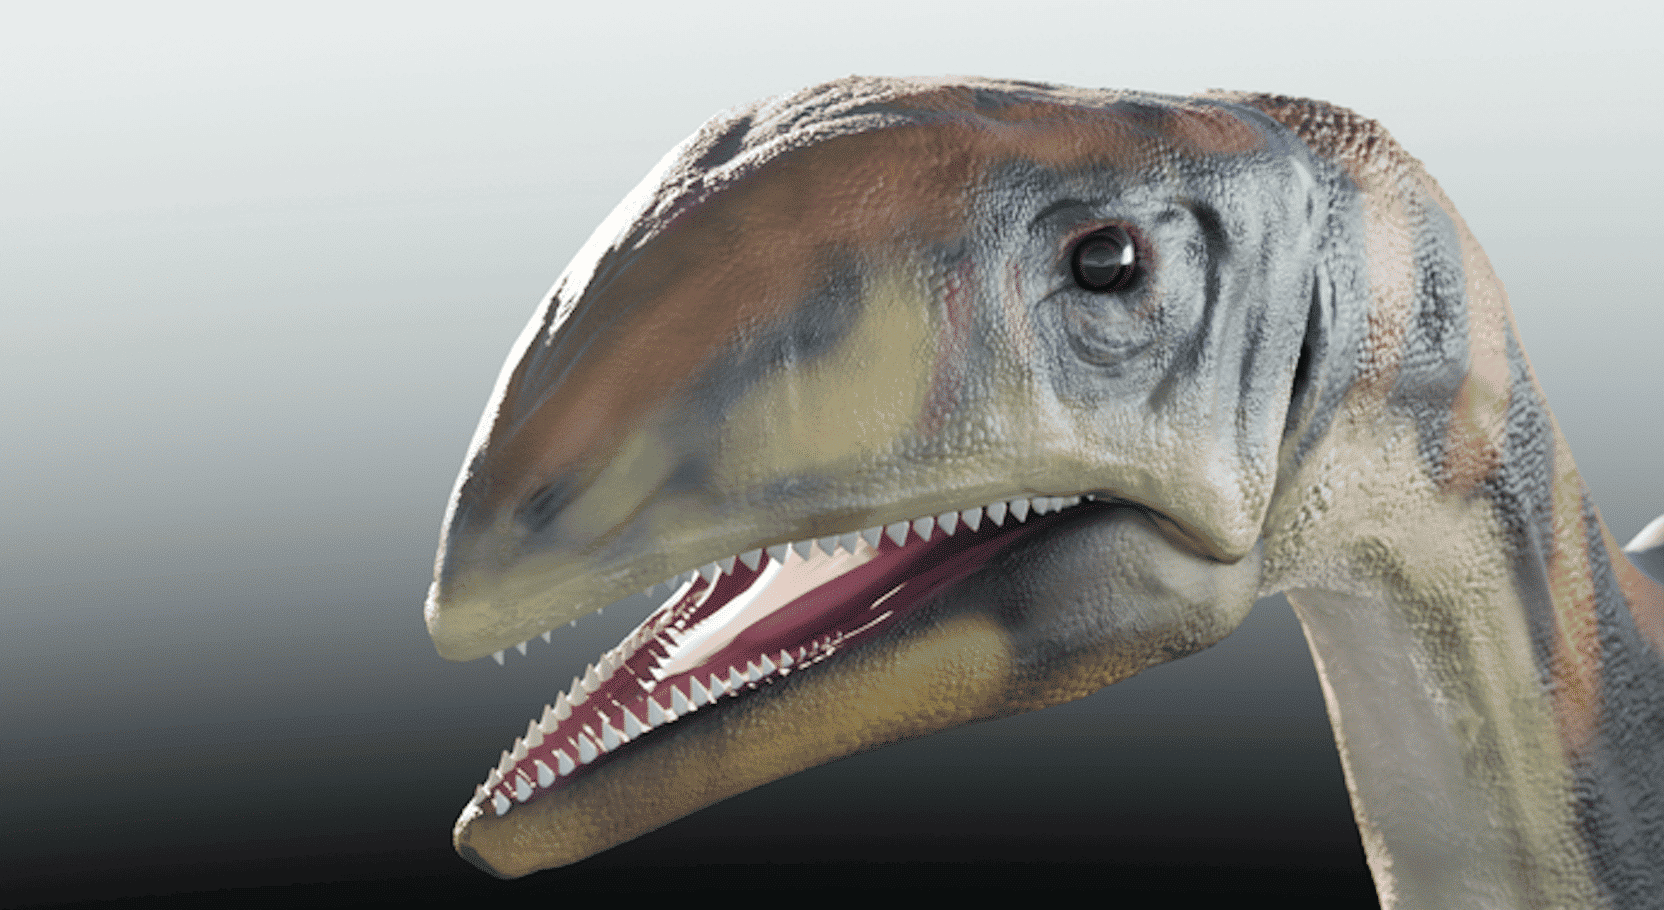 Cold Bone': New Dinosaur Species Discovered in Greenland - EcoWatch